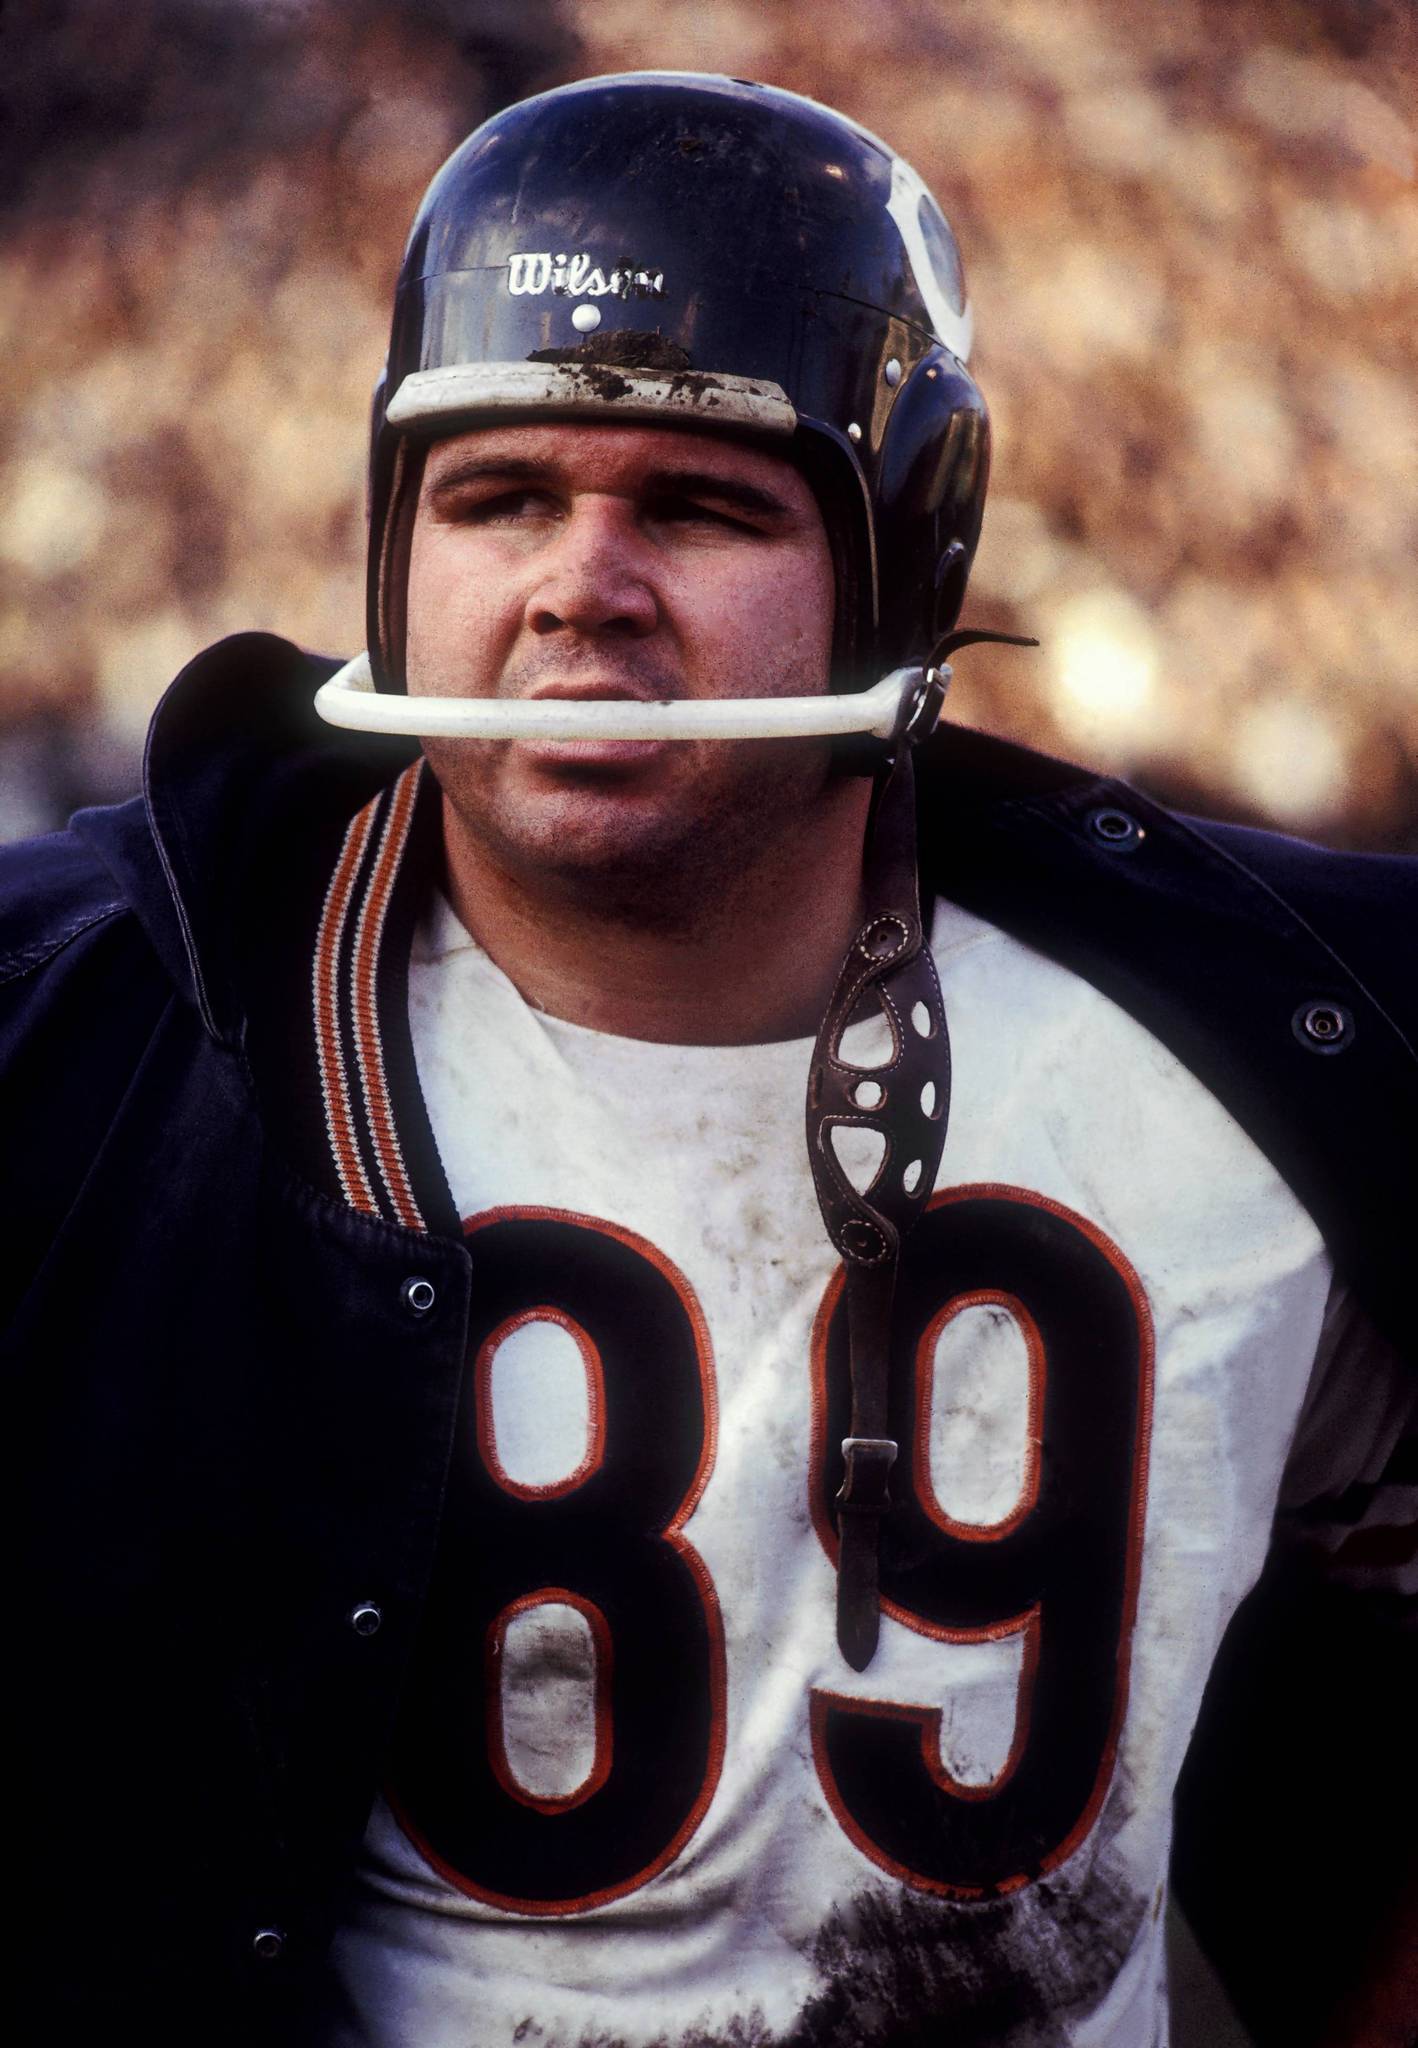 mike ditka jersey